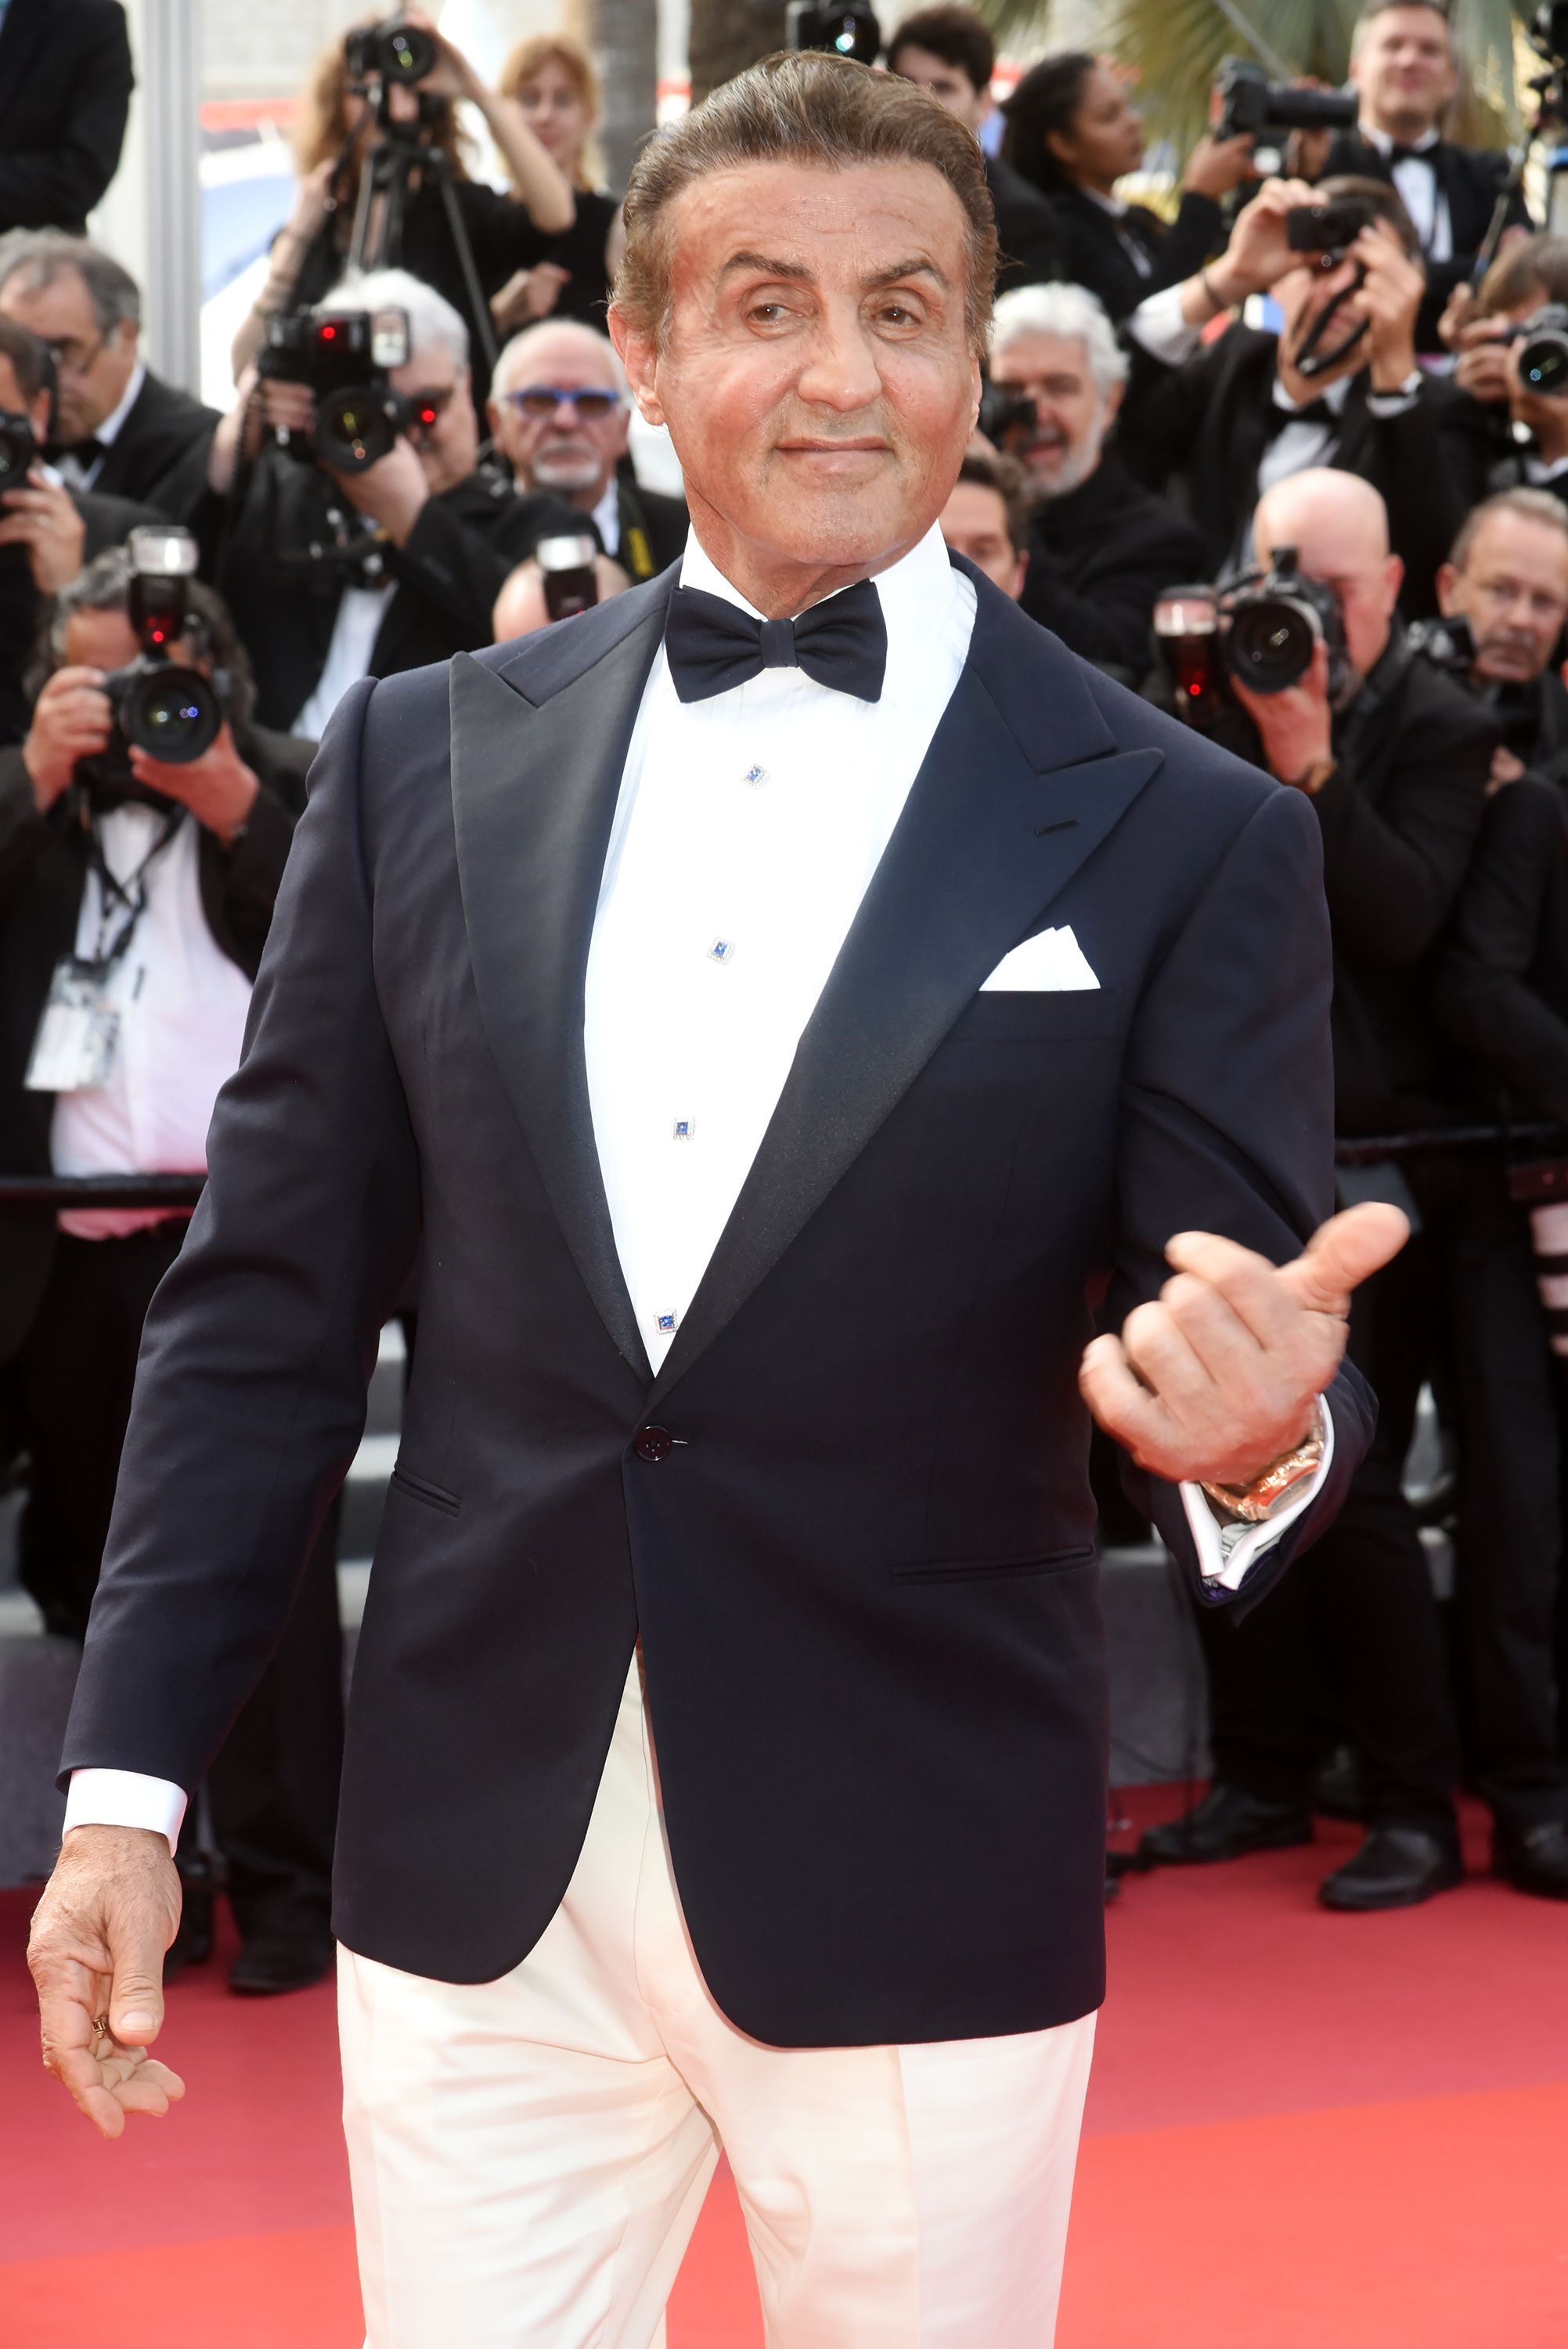 Sylvester Stallone at the closing ceremony screening of "The Specials" during the 72nd annual Cannes Film Festival on May 25, 2019 | Photo: Getty Images